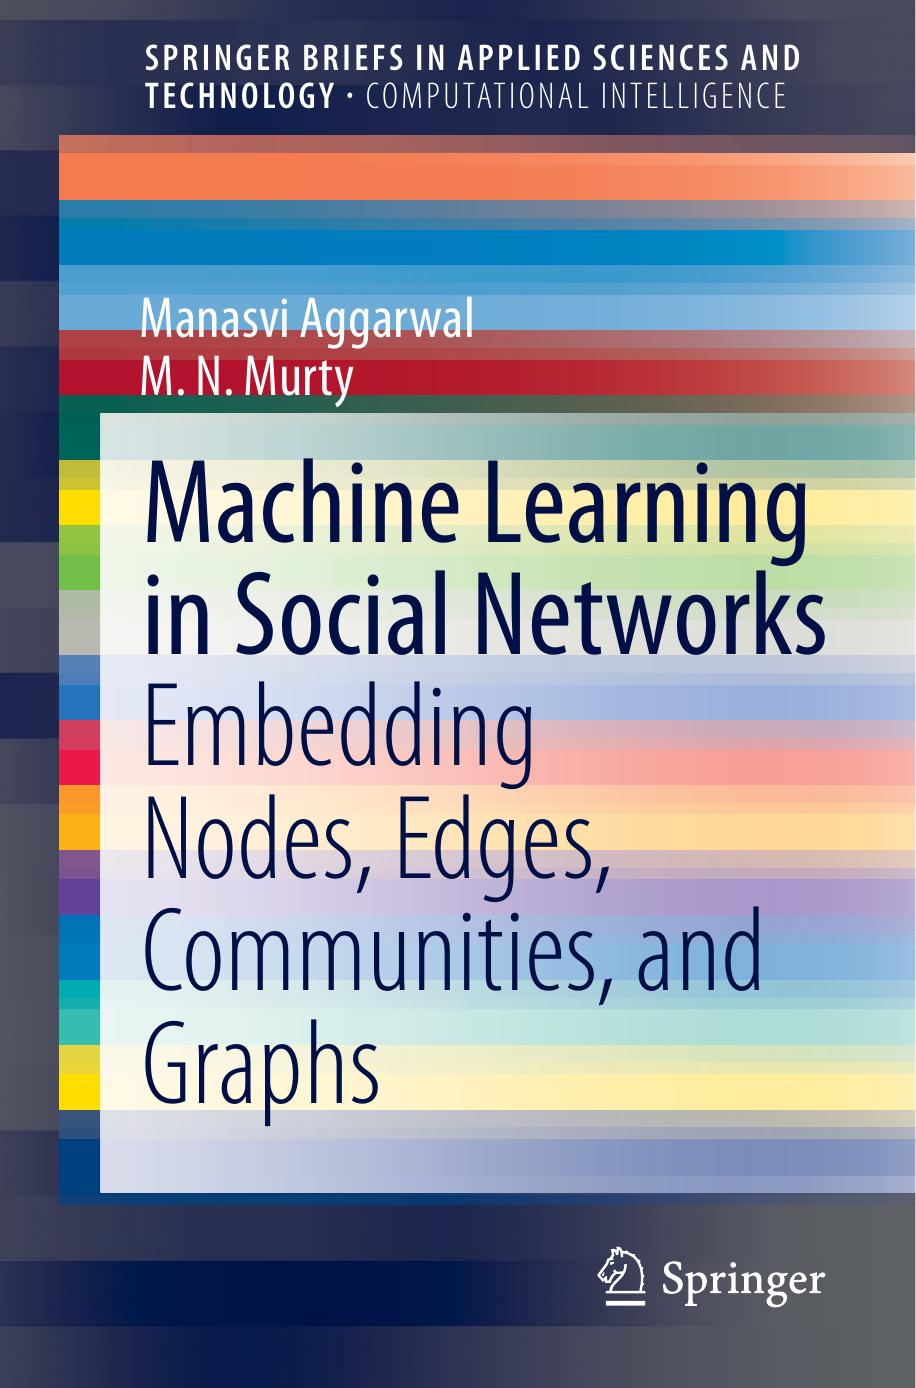 Machine Learning in Social Networks: Embedding Nodes, Edges, Communities, and Graphs